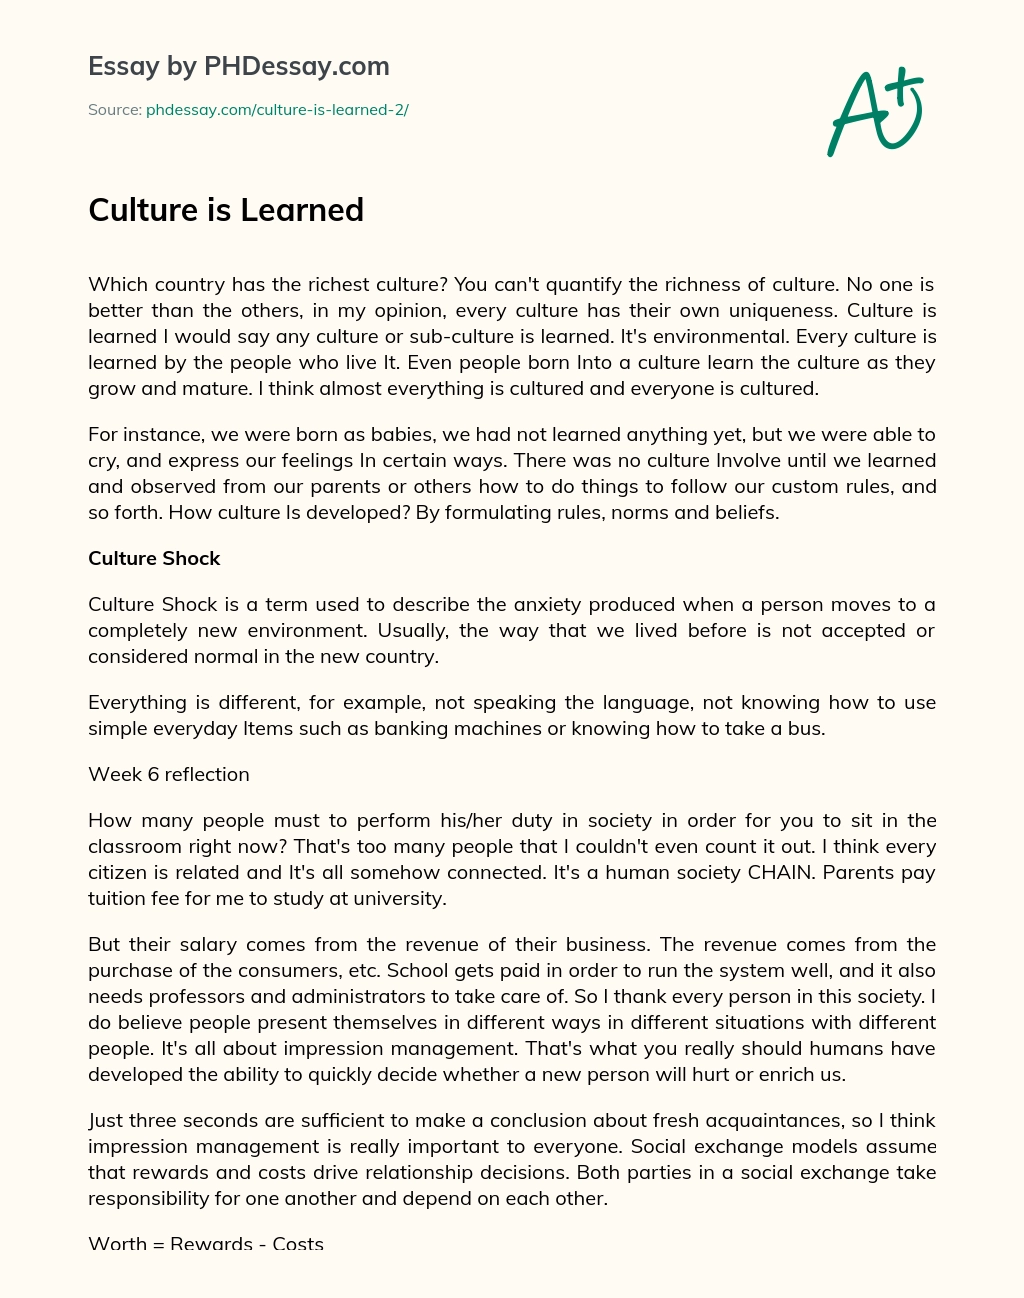 Culture is Learned essay